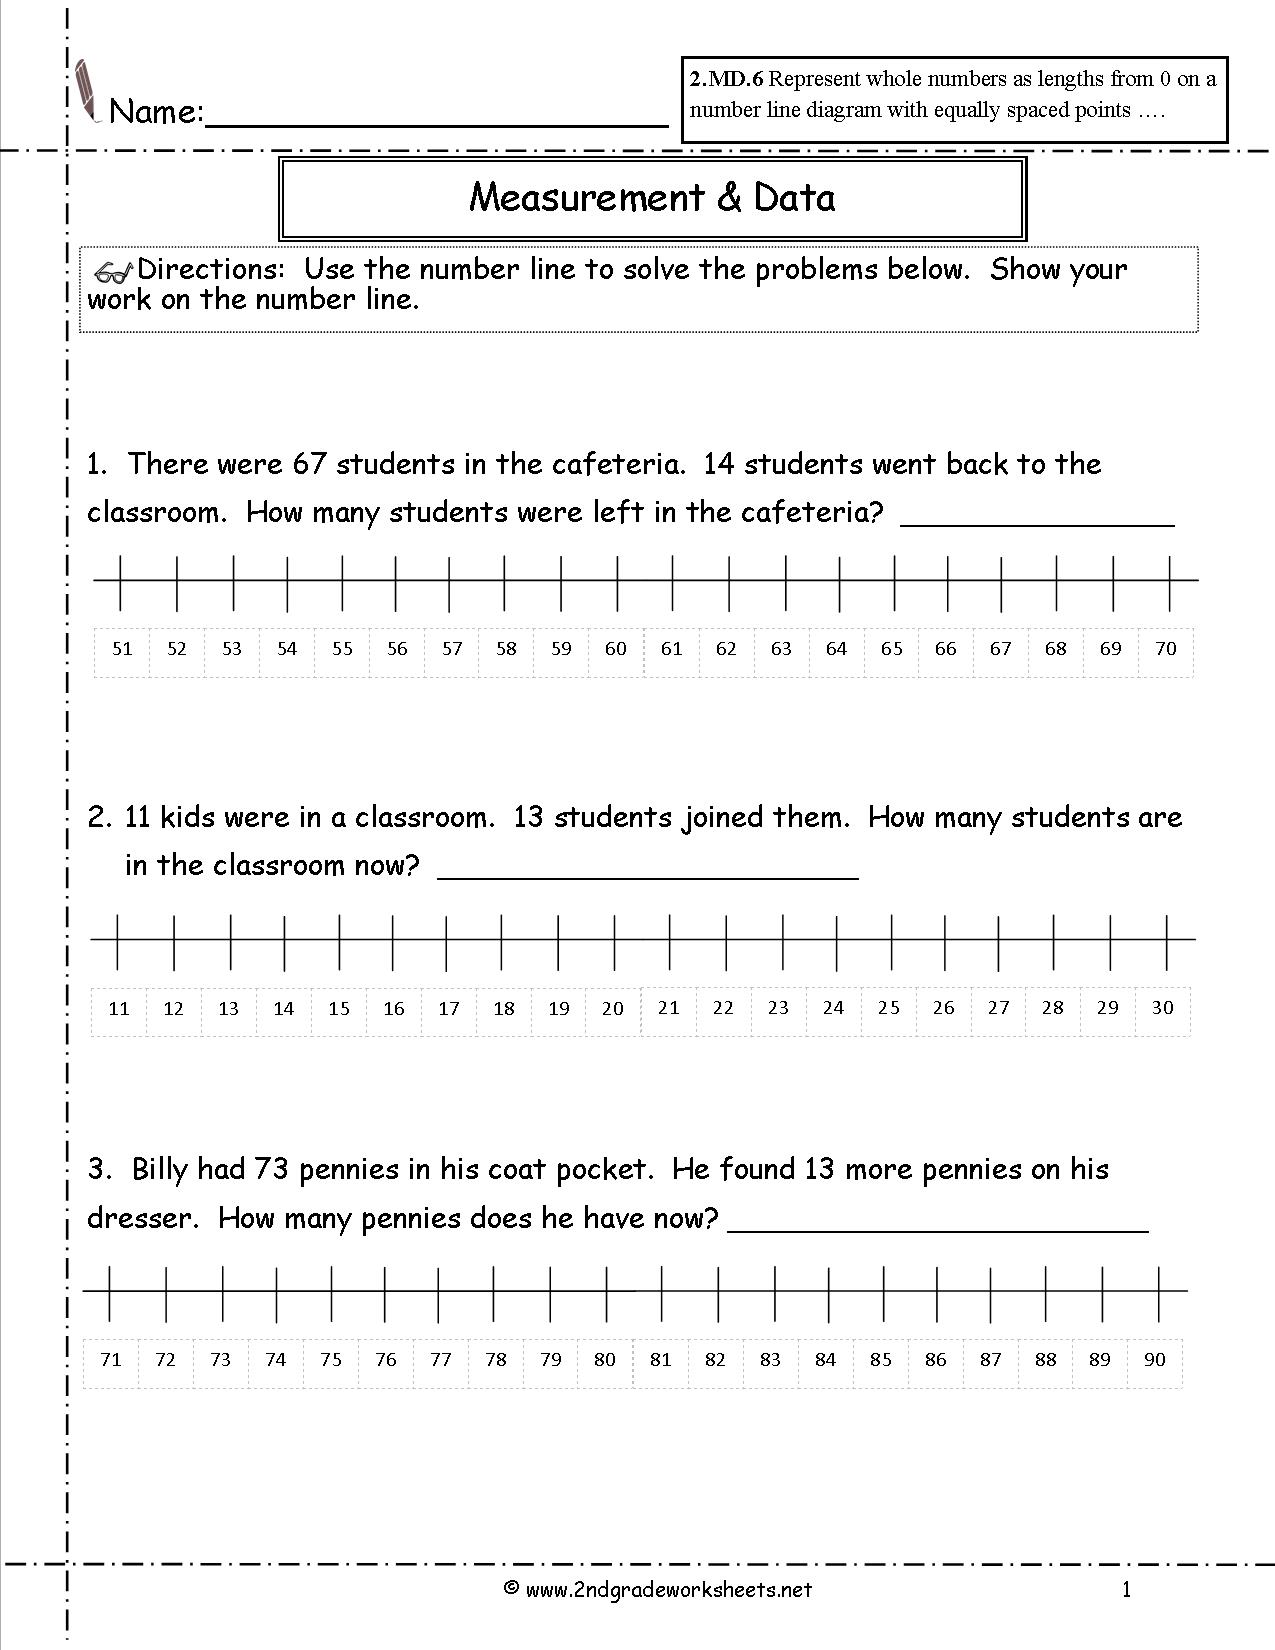 Whole Numbers On A Number Line 2nd Grade Math Worksheet